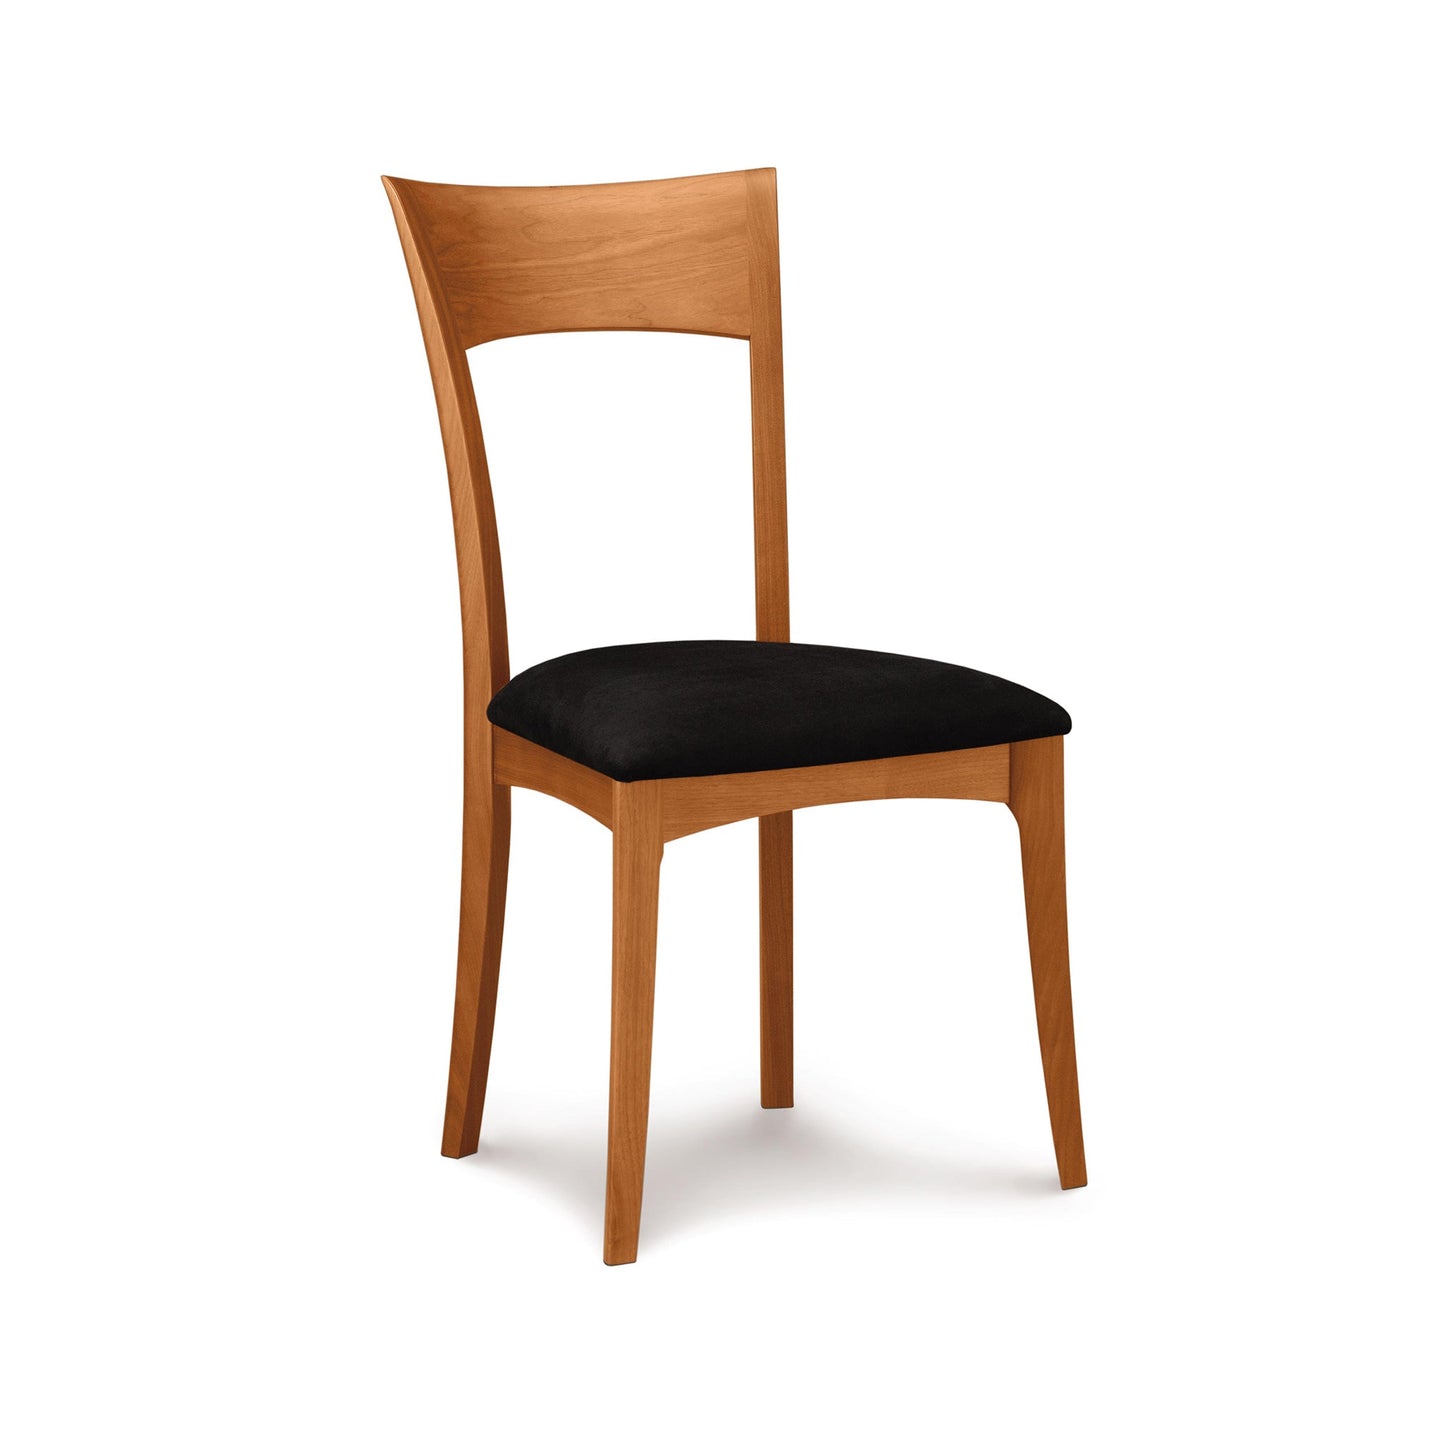 A Copeland Furniture Ingrid Chair - Priority Ship made of solid American cherry wood and featuring a black cushion.